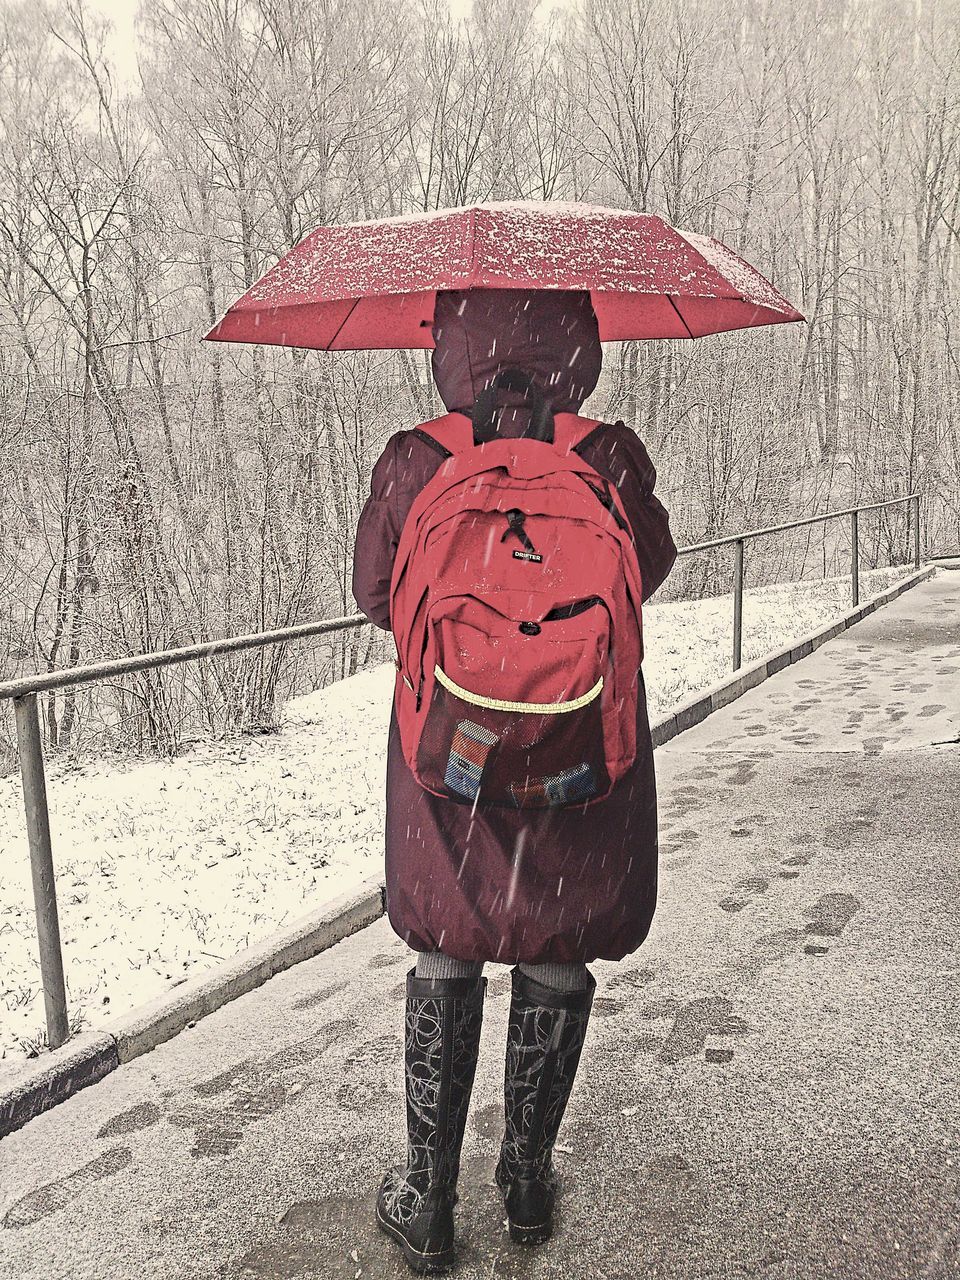 REAR VIEW OF A PERSON STANDING WITH UMBRELLA